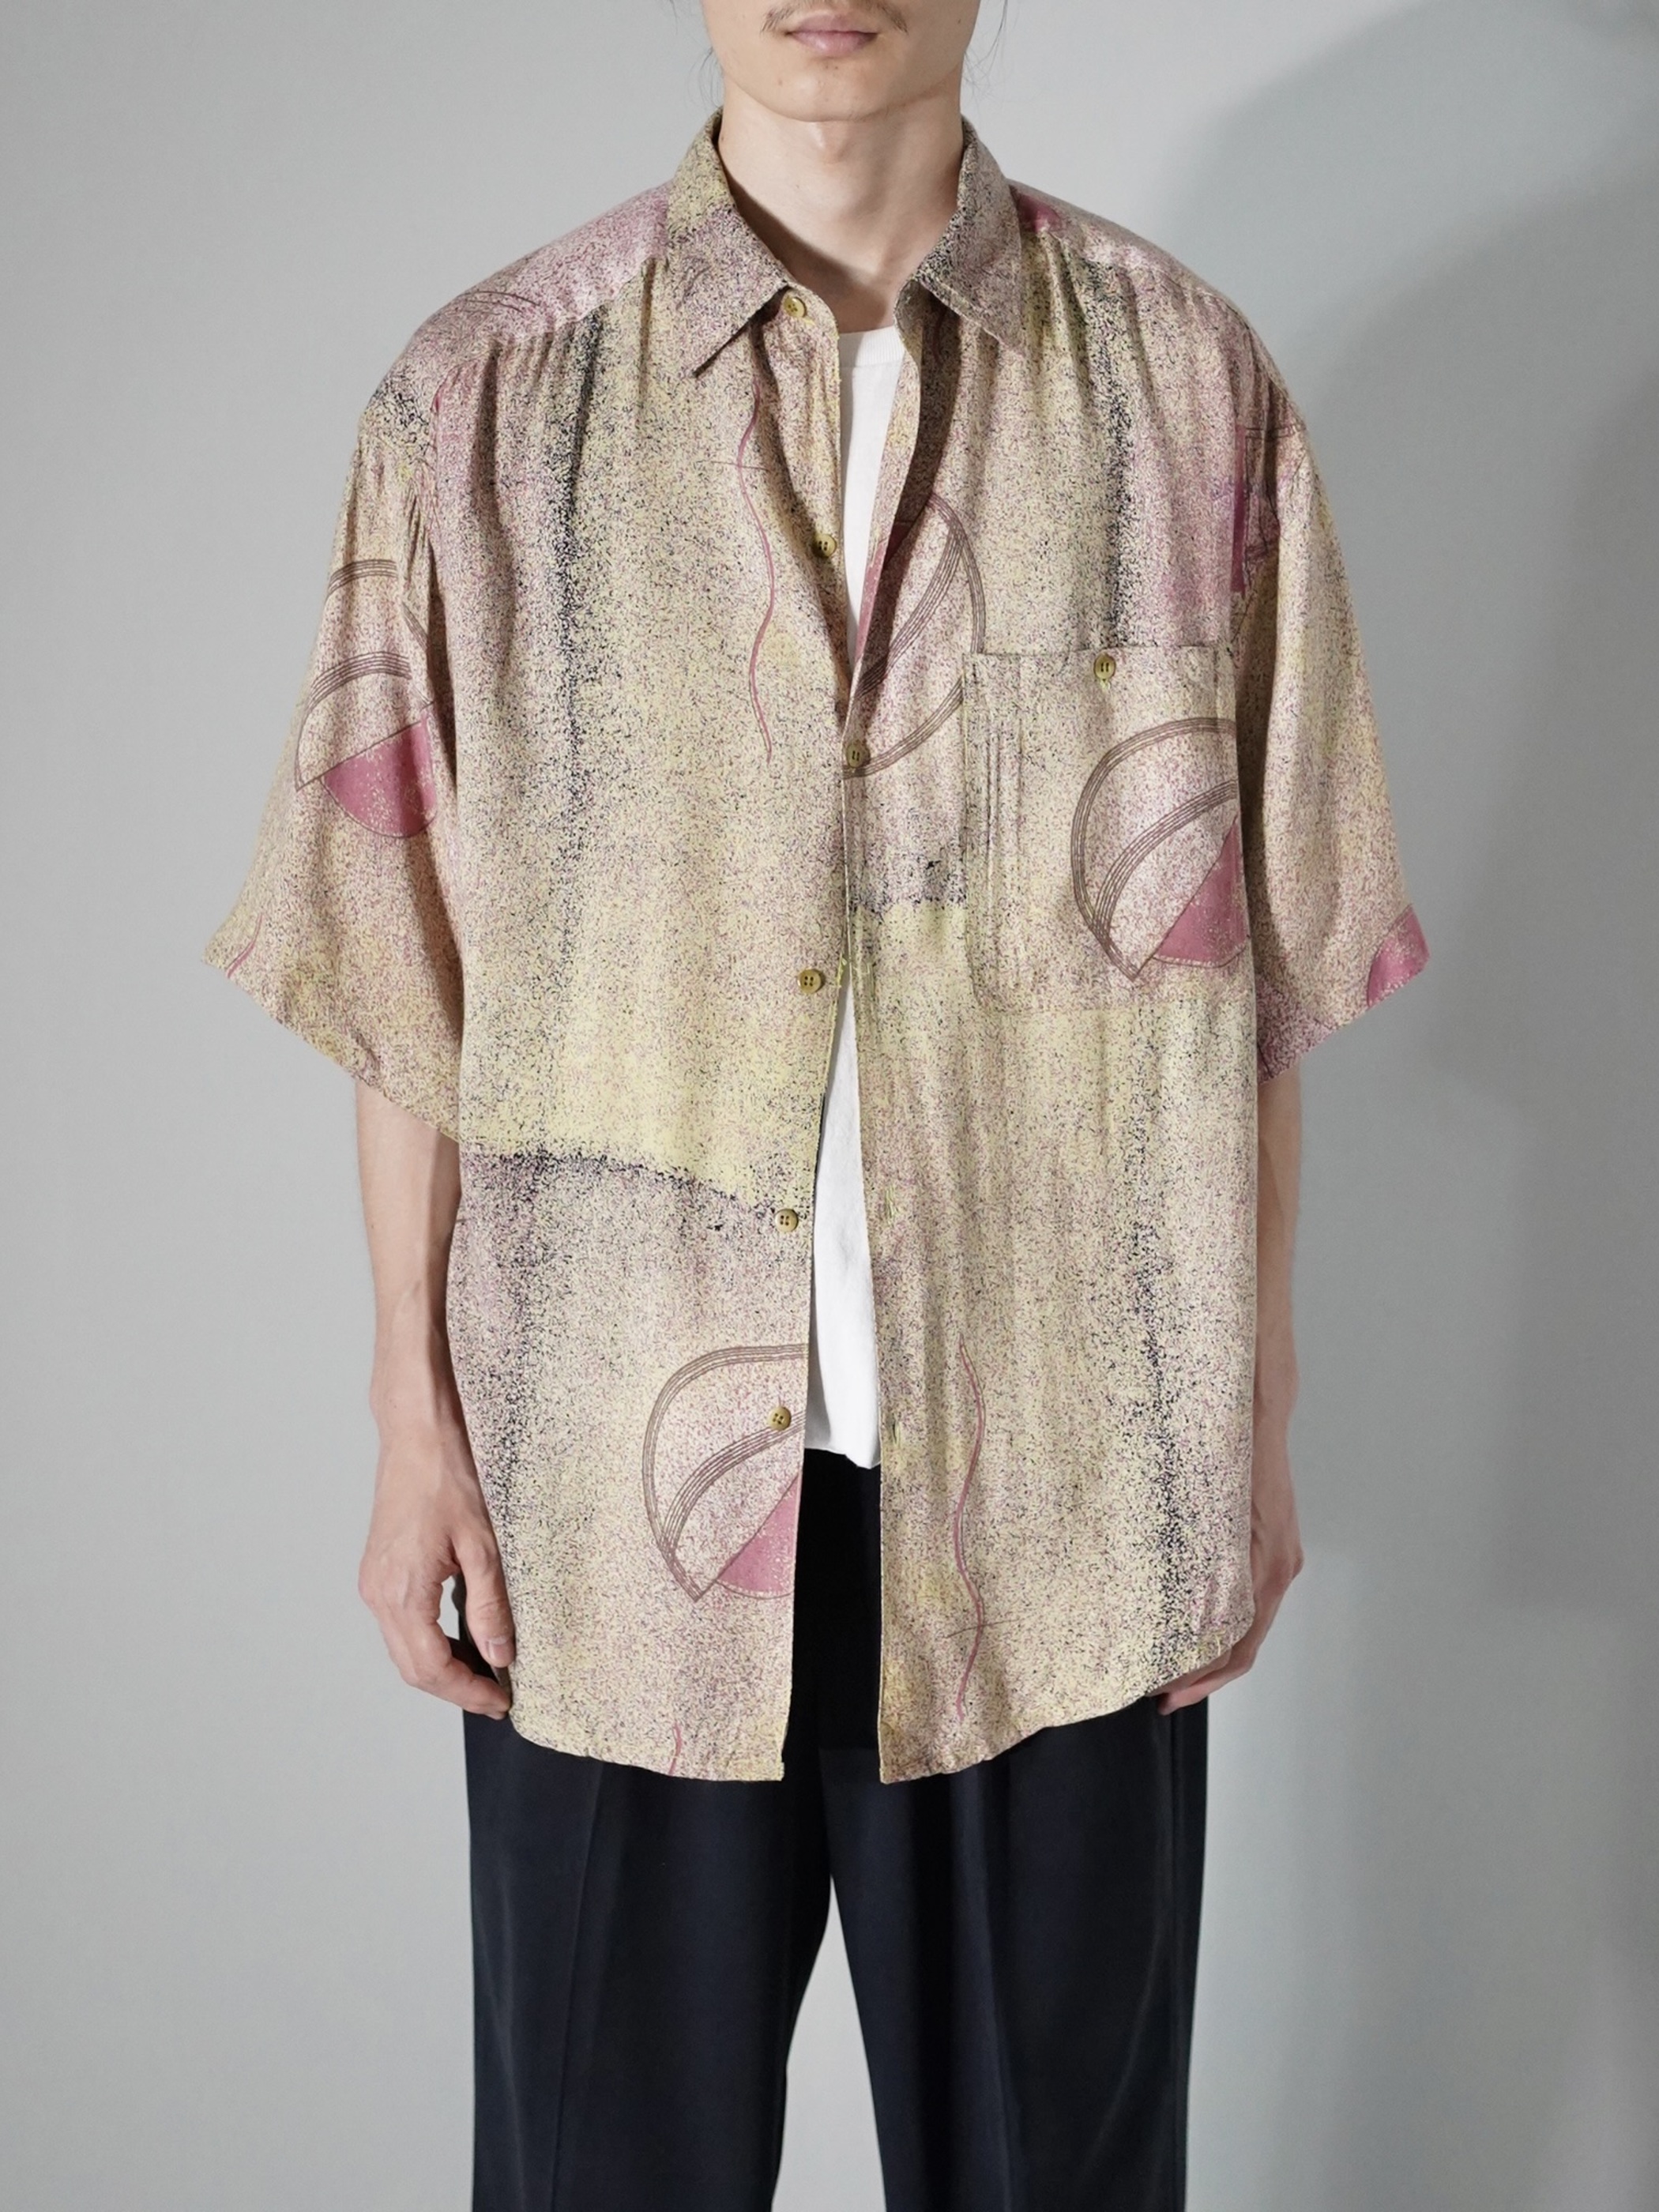 PHIZ by goouch 100%Rayon shirts